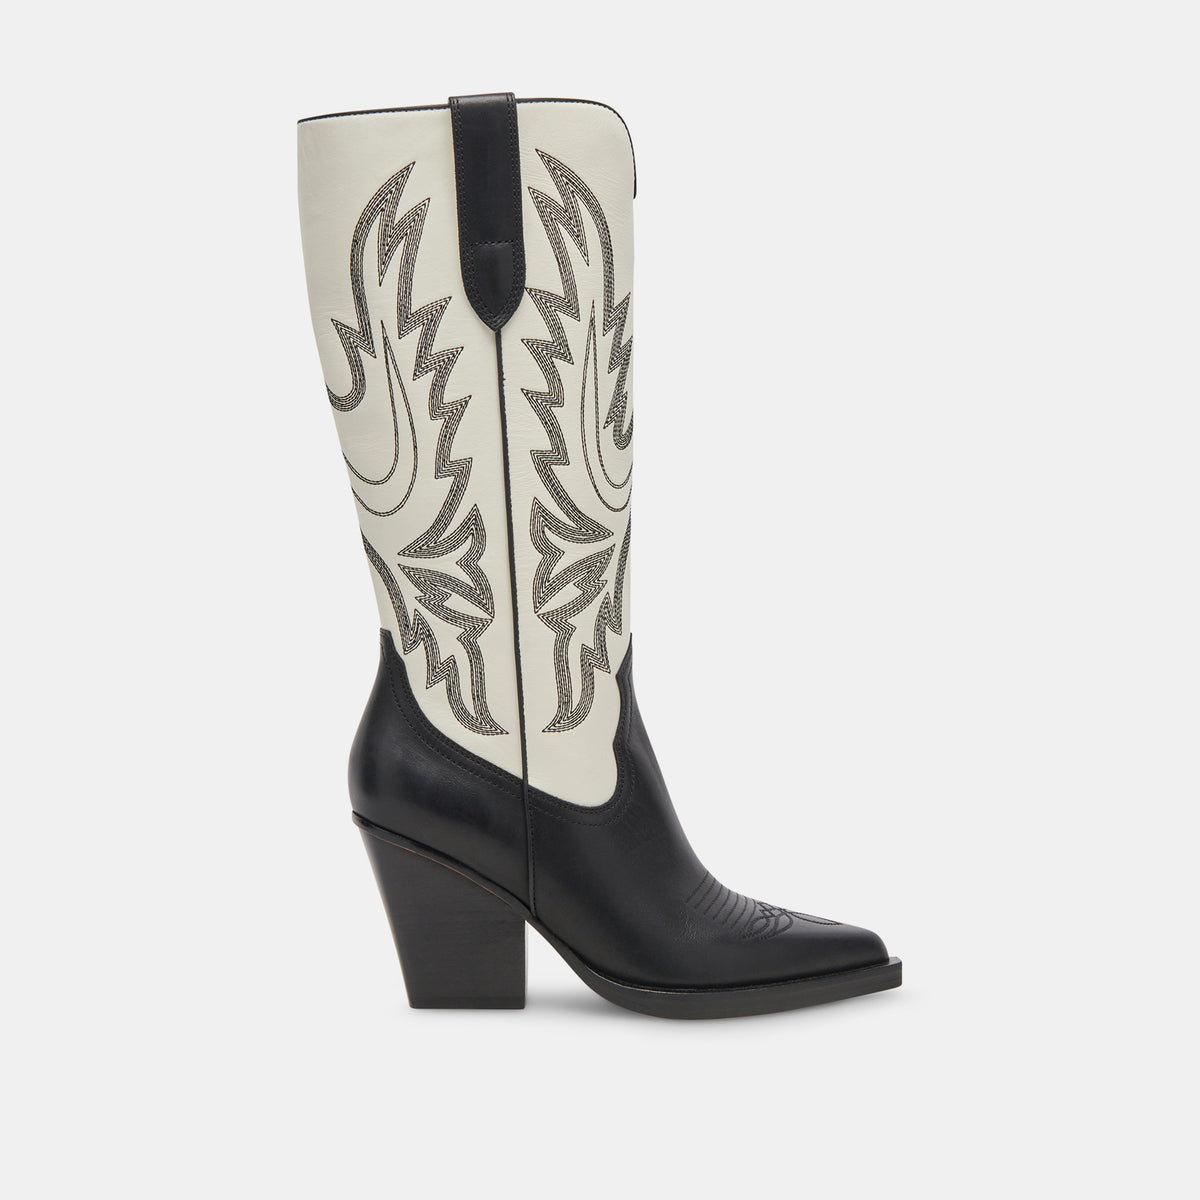 BLANCH BOOTS BLACK WHITE LEATHER – Dolce Vita